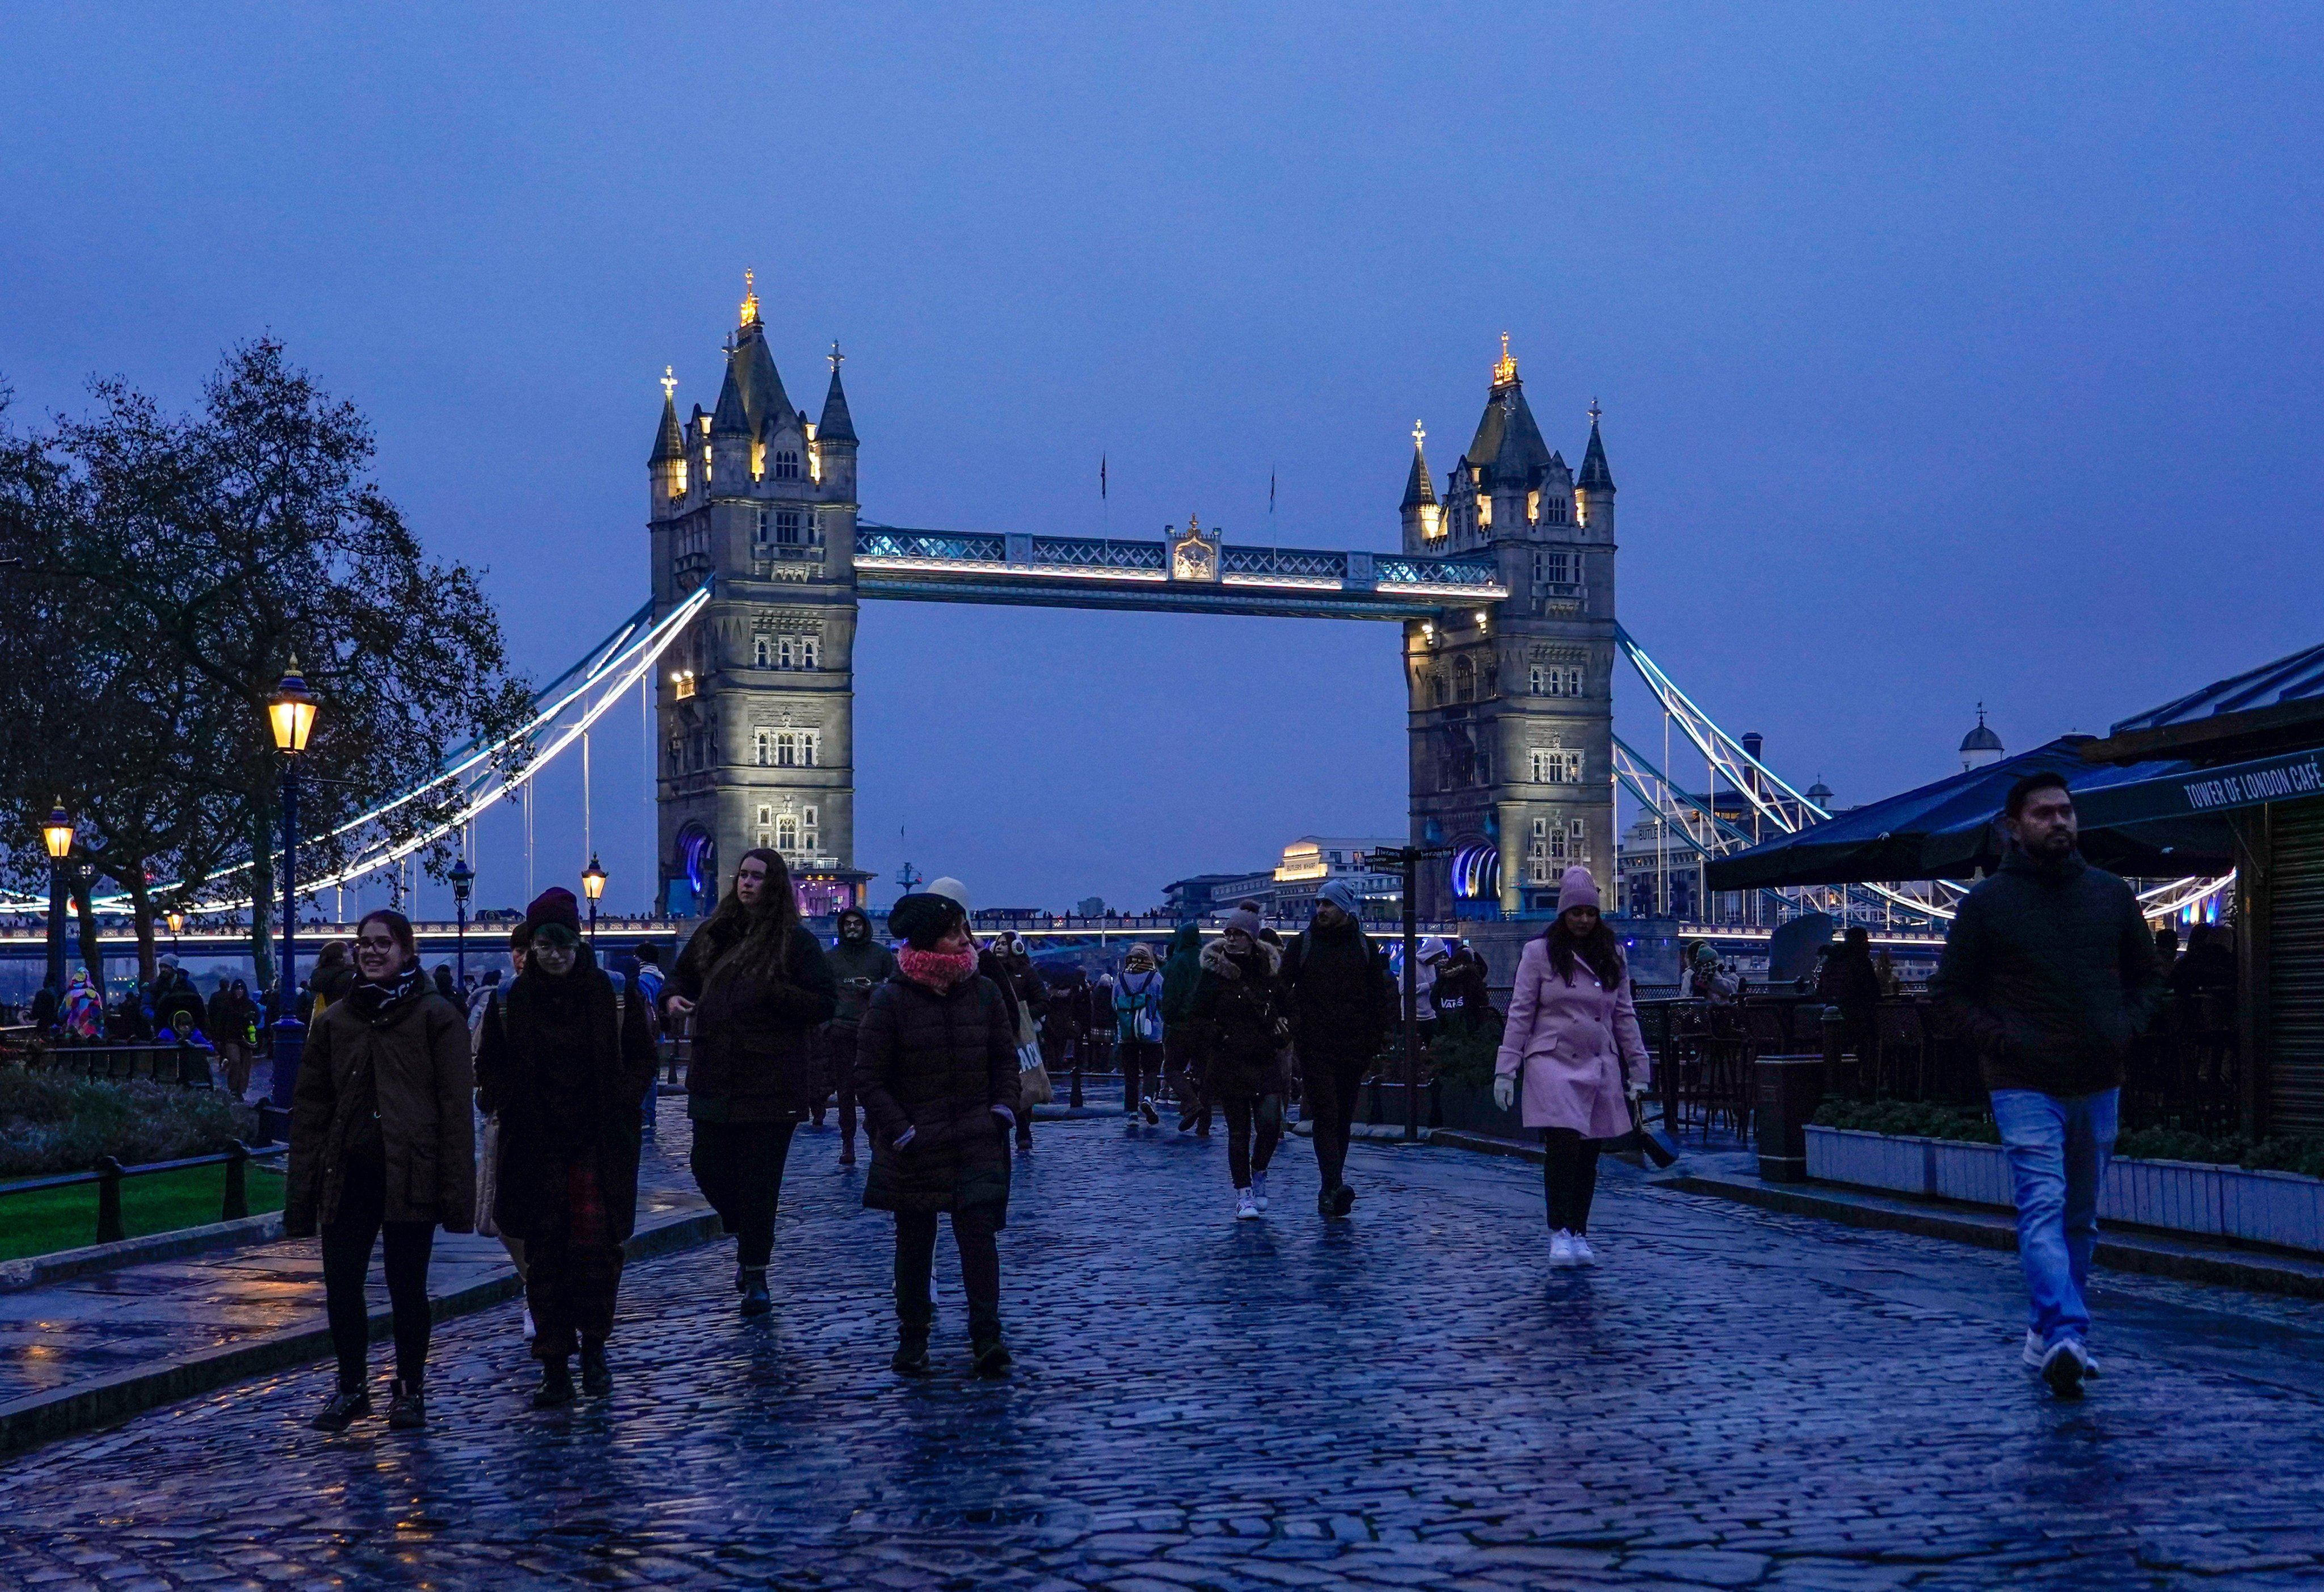 The Tower Bridge in London. The UK announced the pathway to British citizenship for Hongkongers holding BN(O) passports after the promulgation of the national security law in Hong Kong. Photo: AP